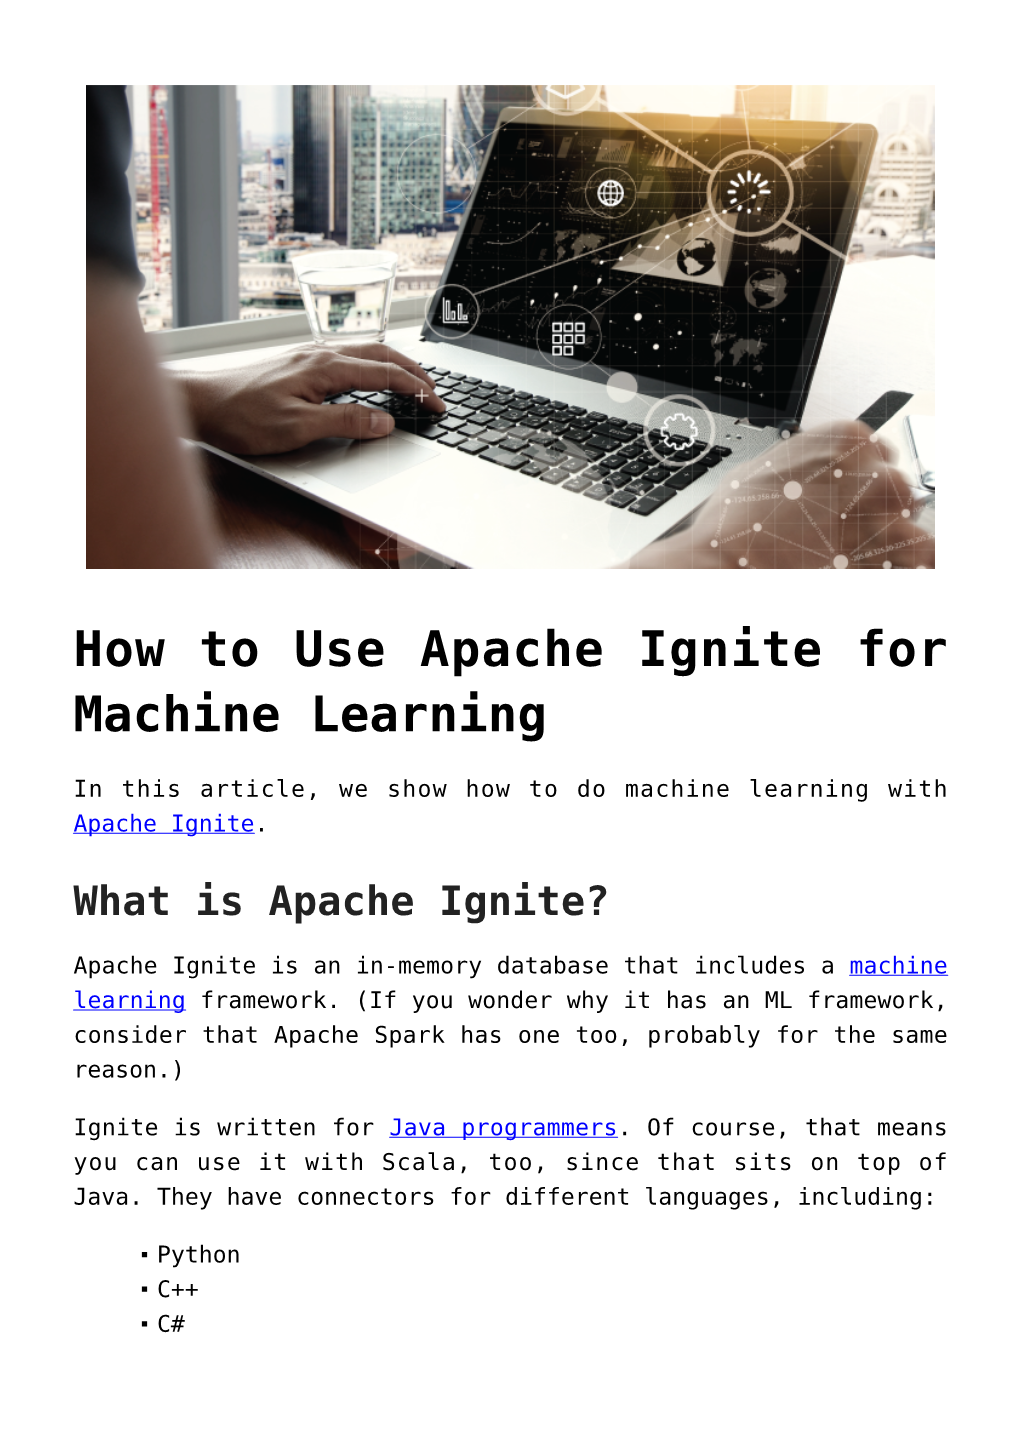 How to Use Apache Ignite for Machine Learning